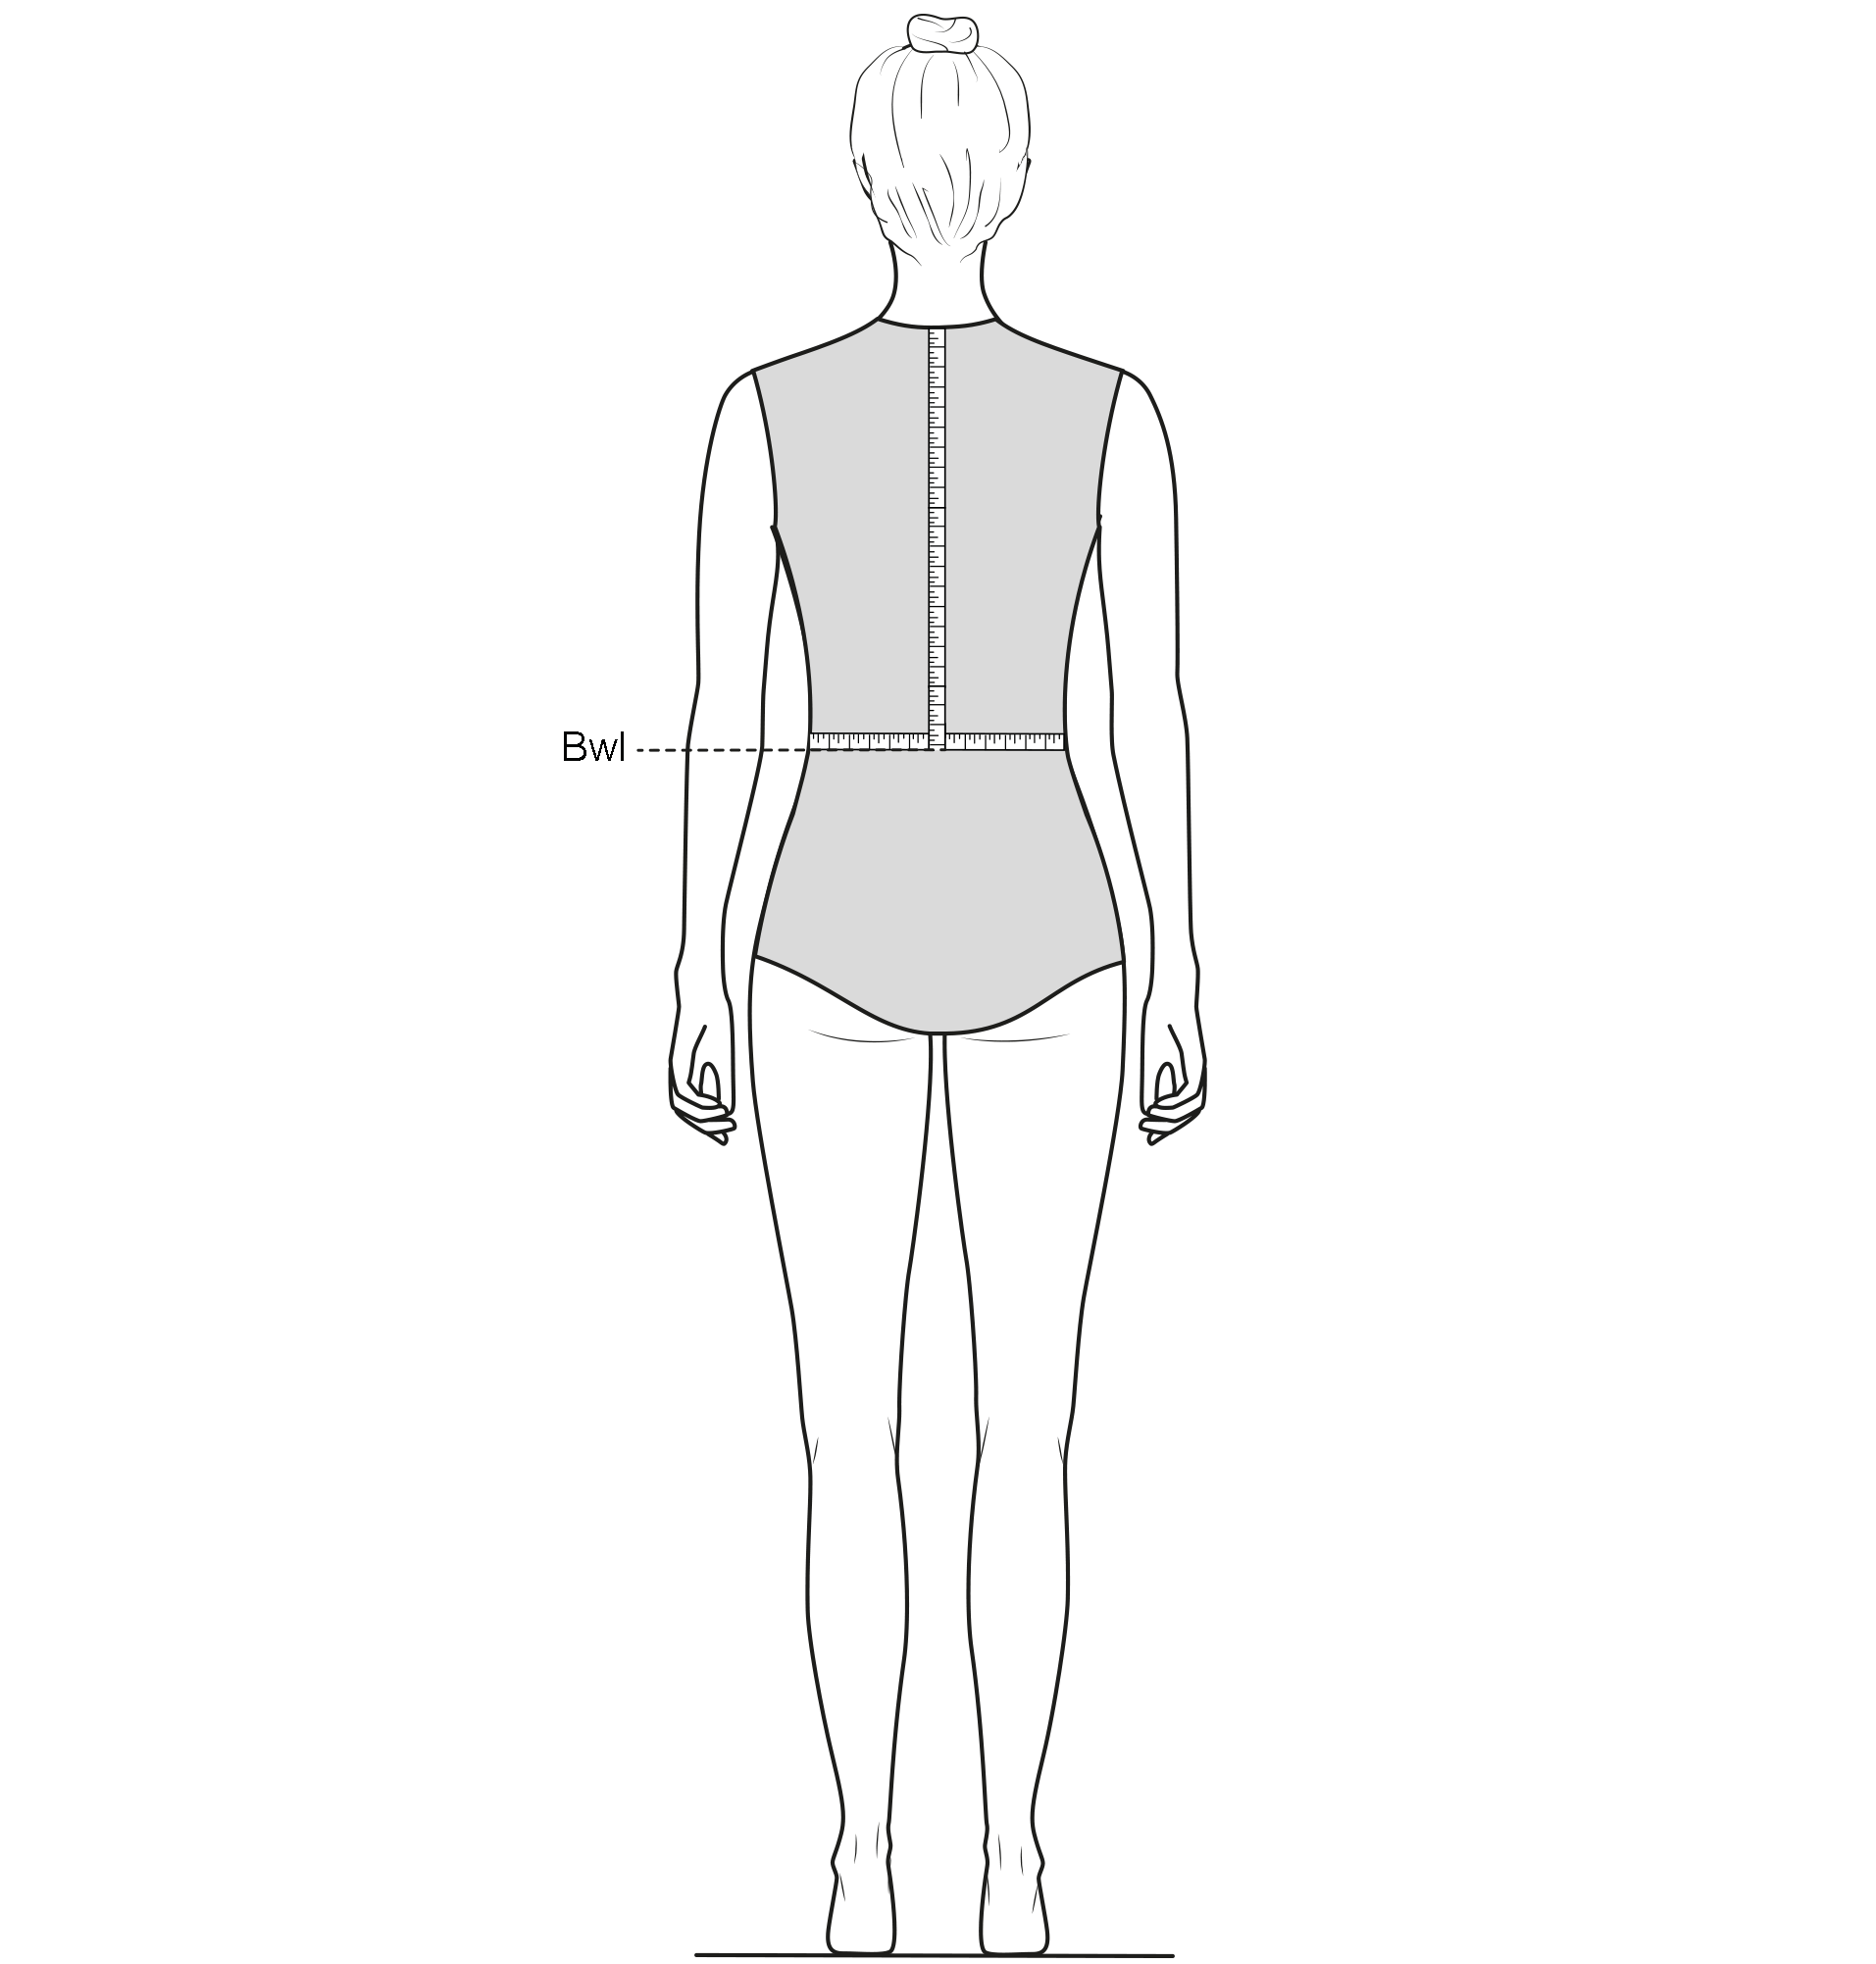 This figure shows the measurement of the Back waist length